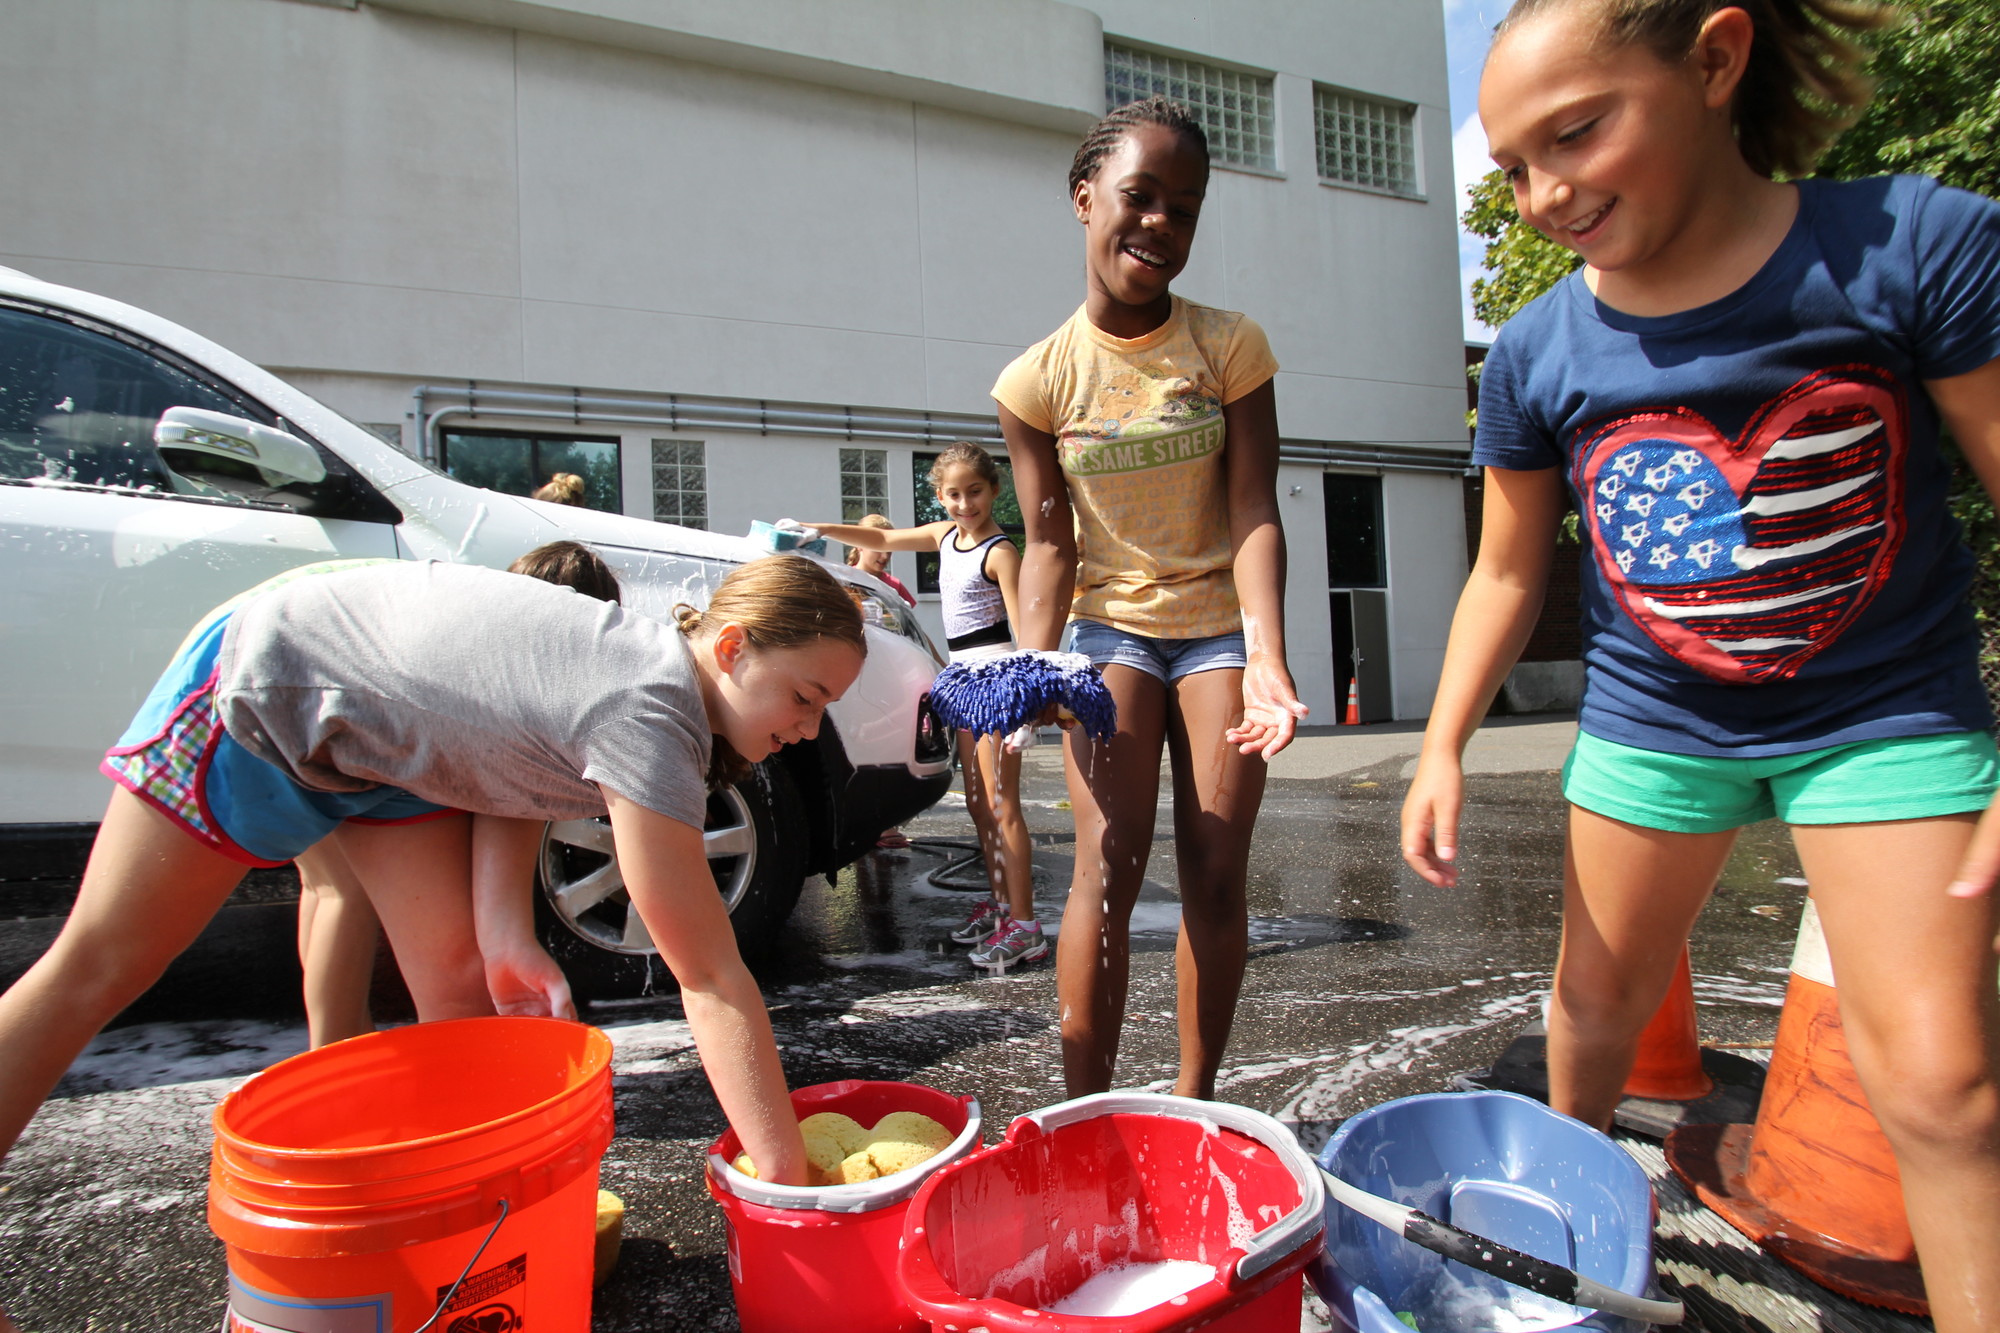 Erin Agoglia, left, Alexa Virgo and Sophie Greenberg, members of the Rec Center’s Ultimate Gymnastics team soaped up their sponges during the Gymnastics Car Wash at the Rec Center last weekend.